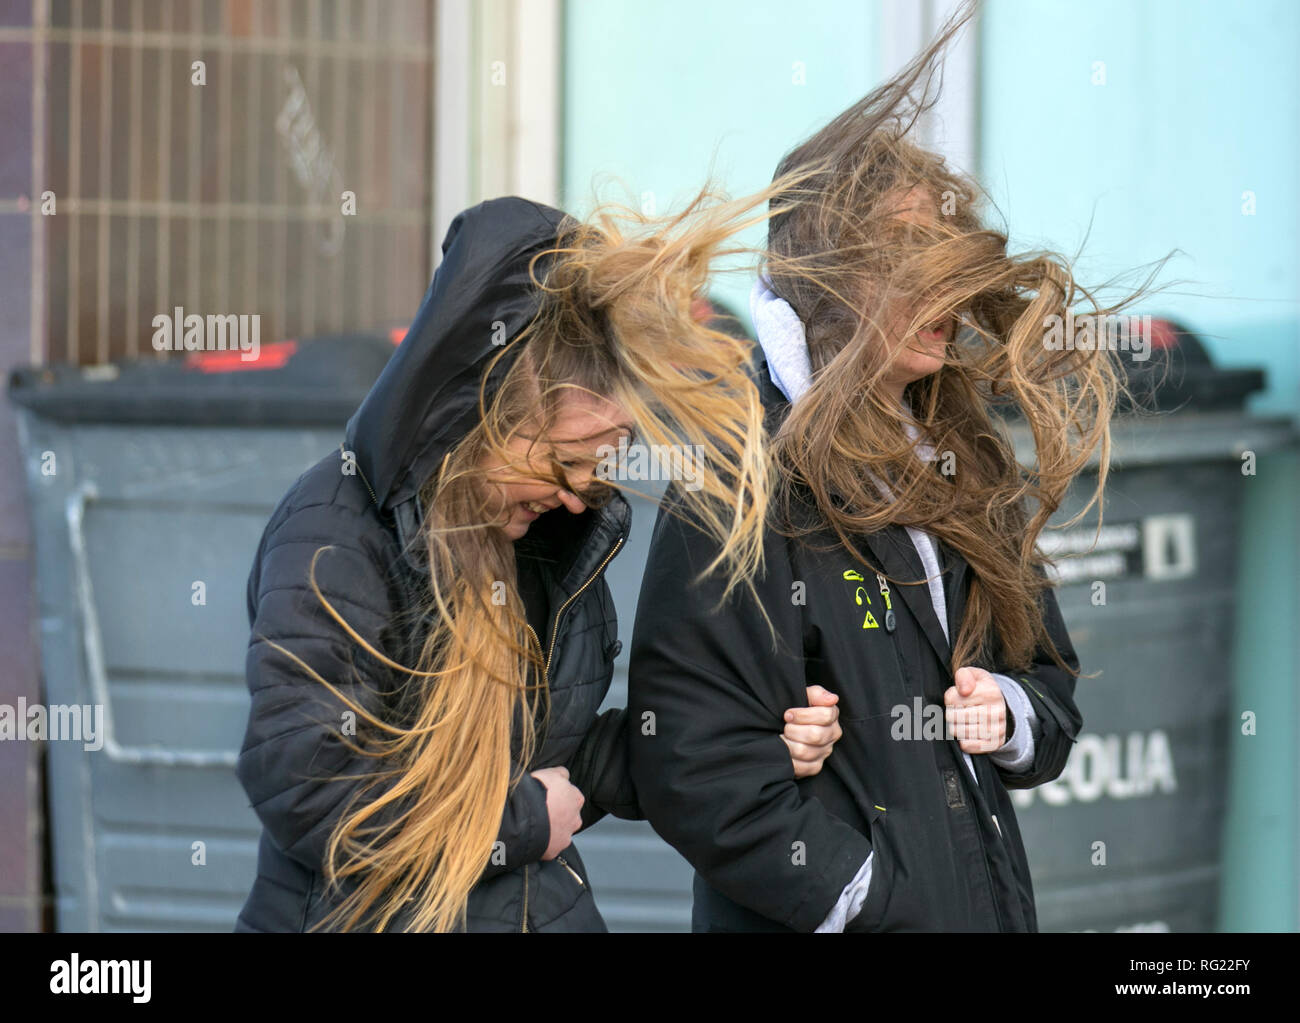 Blackpool, Lancashire. 27th Jan, 2019. UK Weather. Gale force winds at the coast. Visitors to the seaside town have to endure severe winds with pedestrians being blown over on the seafront promenade. Storm , blow, tempest, flyaway hair, tangled tresses, bad hair day on the seafront promenade.Credit:MediaWorldImages/AlamyLiveNews Stock Photo